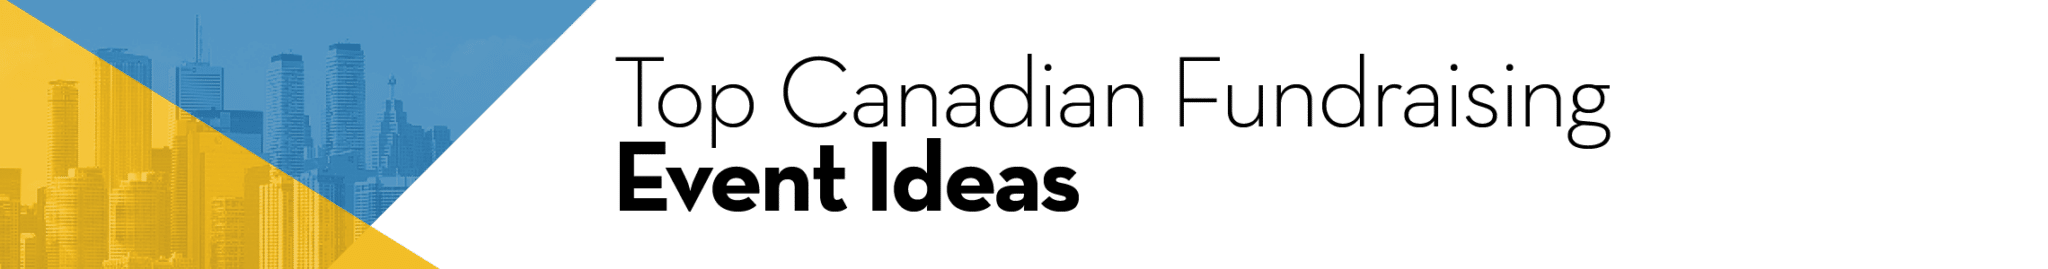 Top Canadian Fundraising Event Ideas